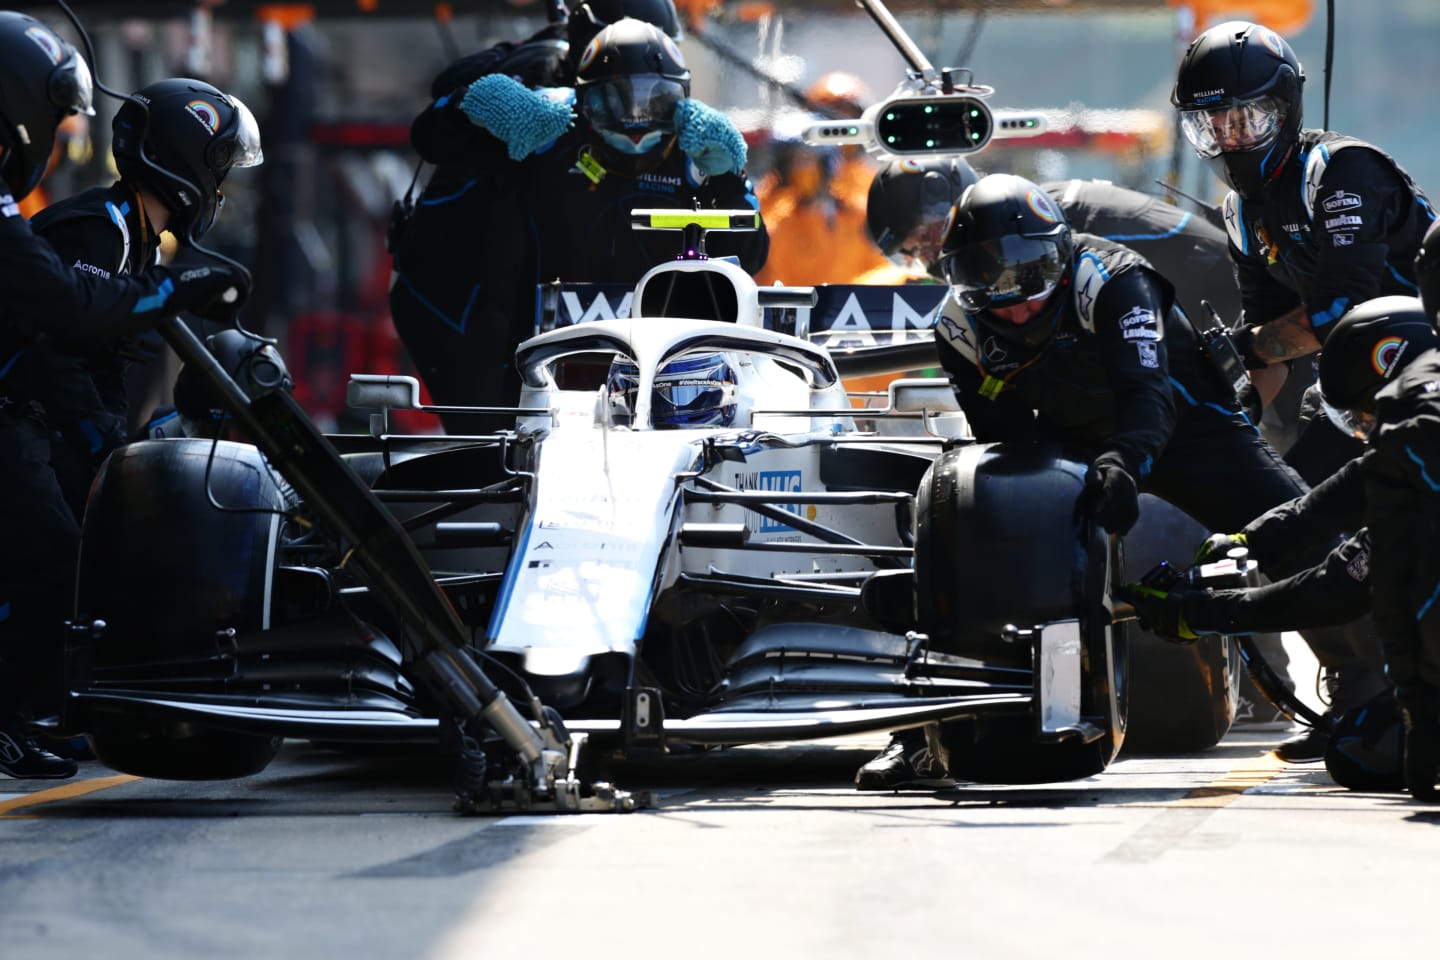 NORTHAMPTON, ENGLAND - AUGUST 09: Nicholas Latifi of Canada driving the (6) Williams Racing FW43 Mercedes makes a pitstop during the F1 70th Anniversary Grand Prix at Silverstone on August 09, 2020 in Northampton, England. (Photo by Peter Fox/Getty Images)